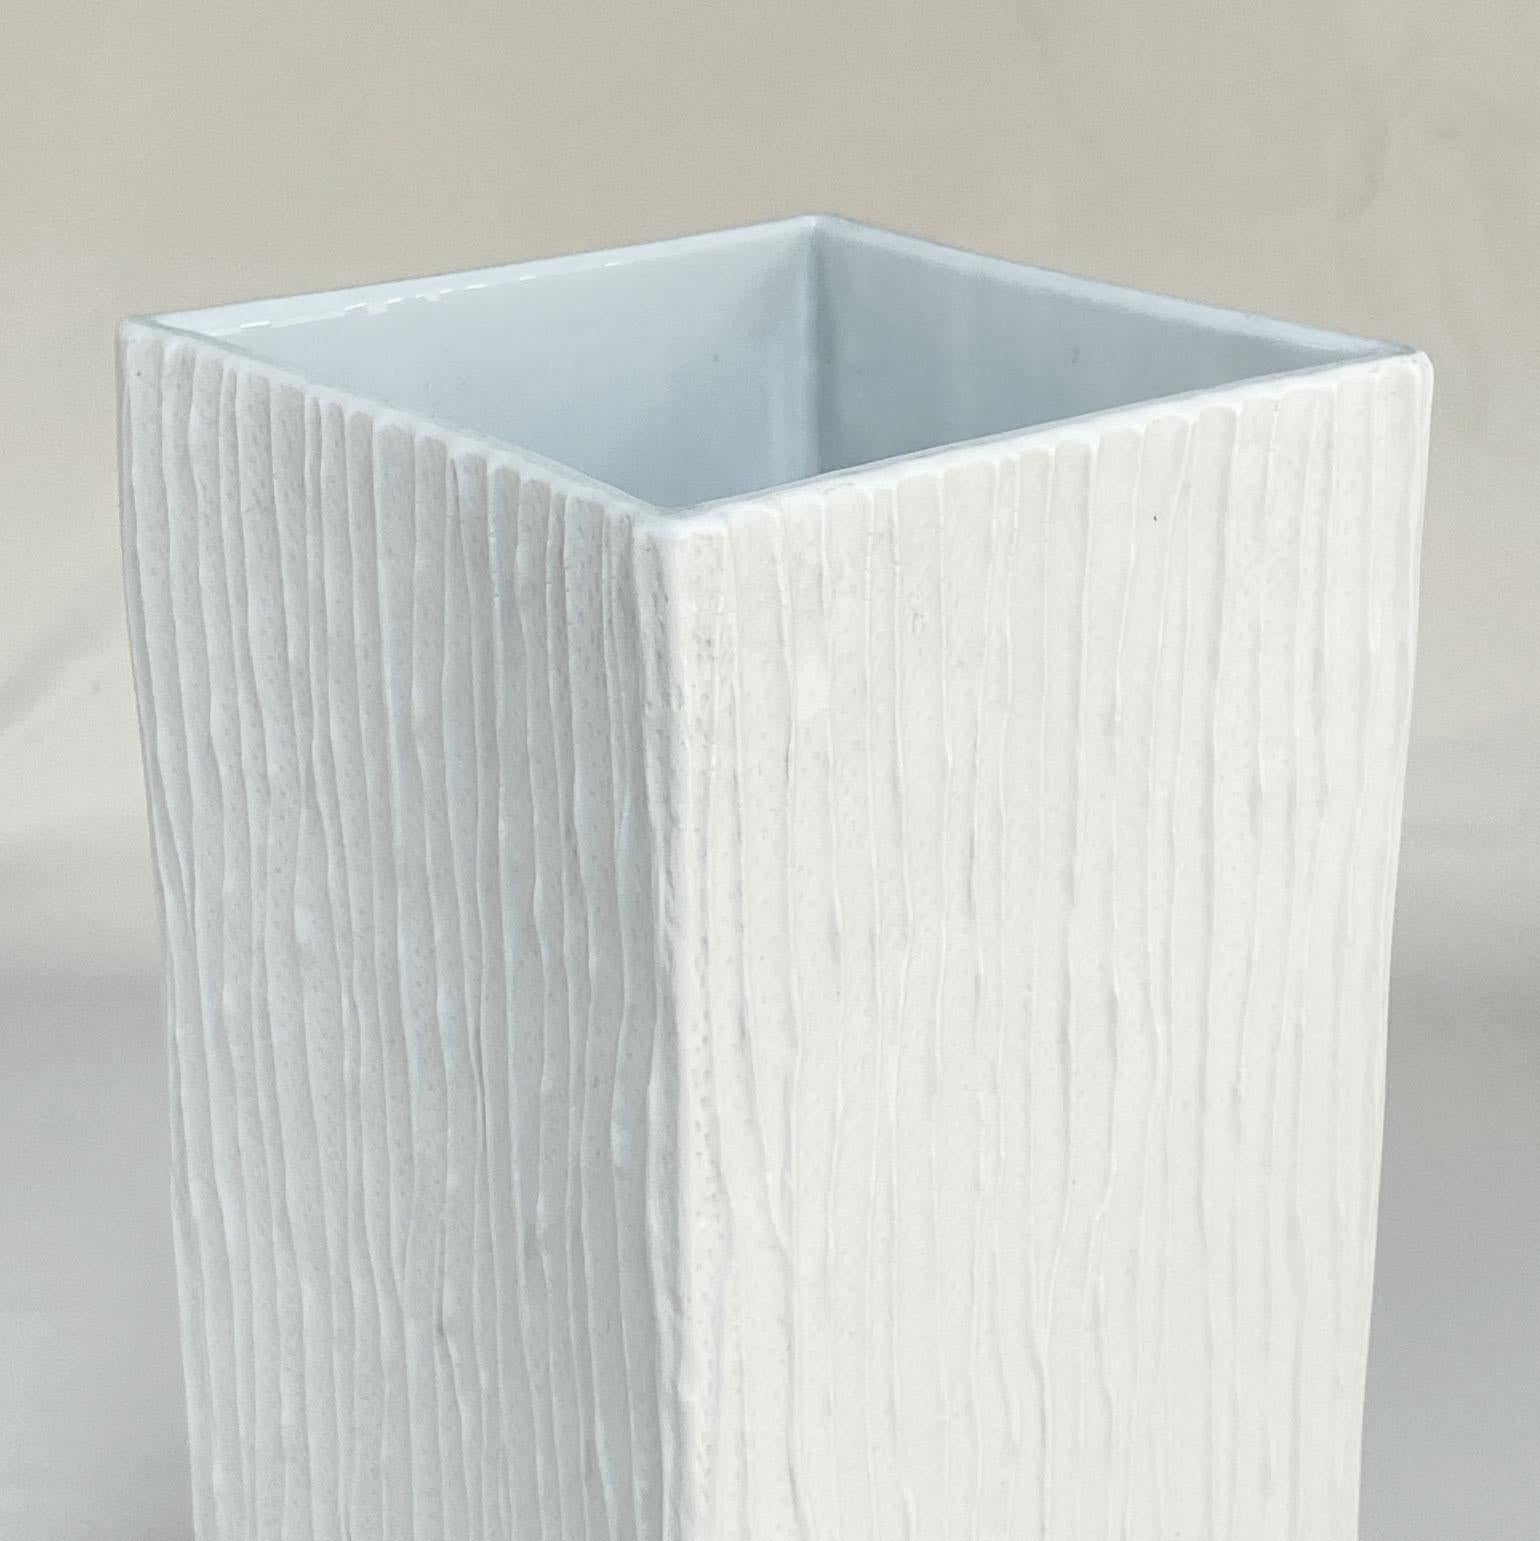 Pair of Large White Square Relief Vases by Hutschenreuther For Sale 4